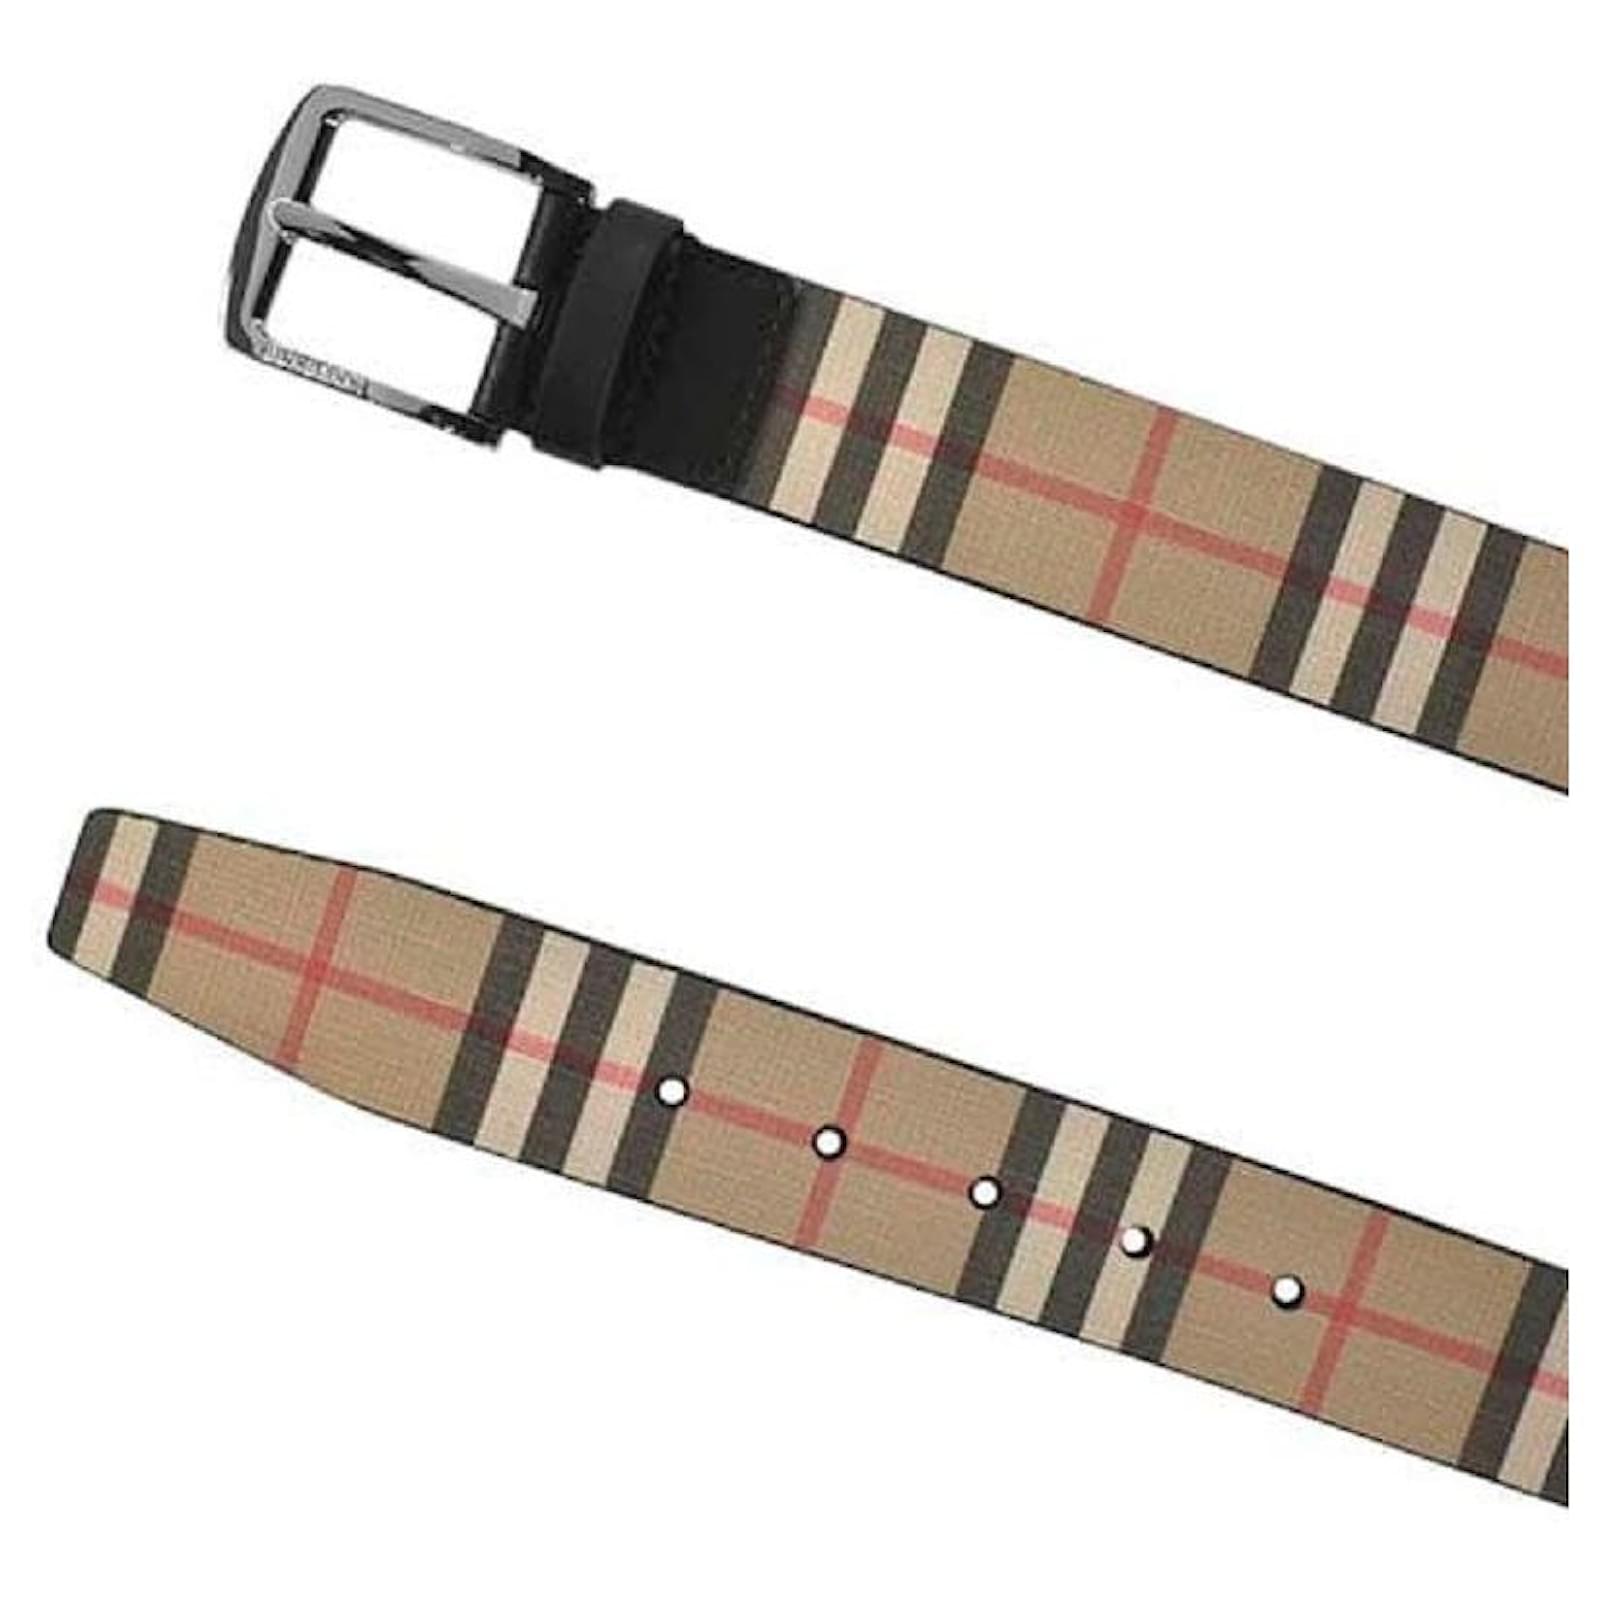 BURBERRY MEN's CASUAL BELT - CHECK AND LEATHER - SIZE 100/40